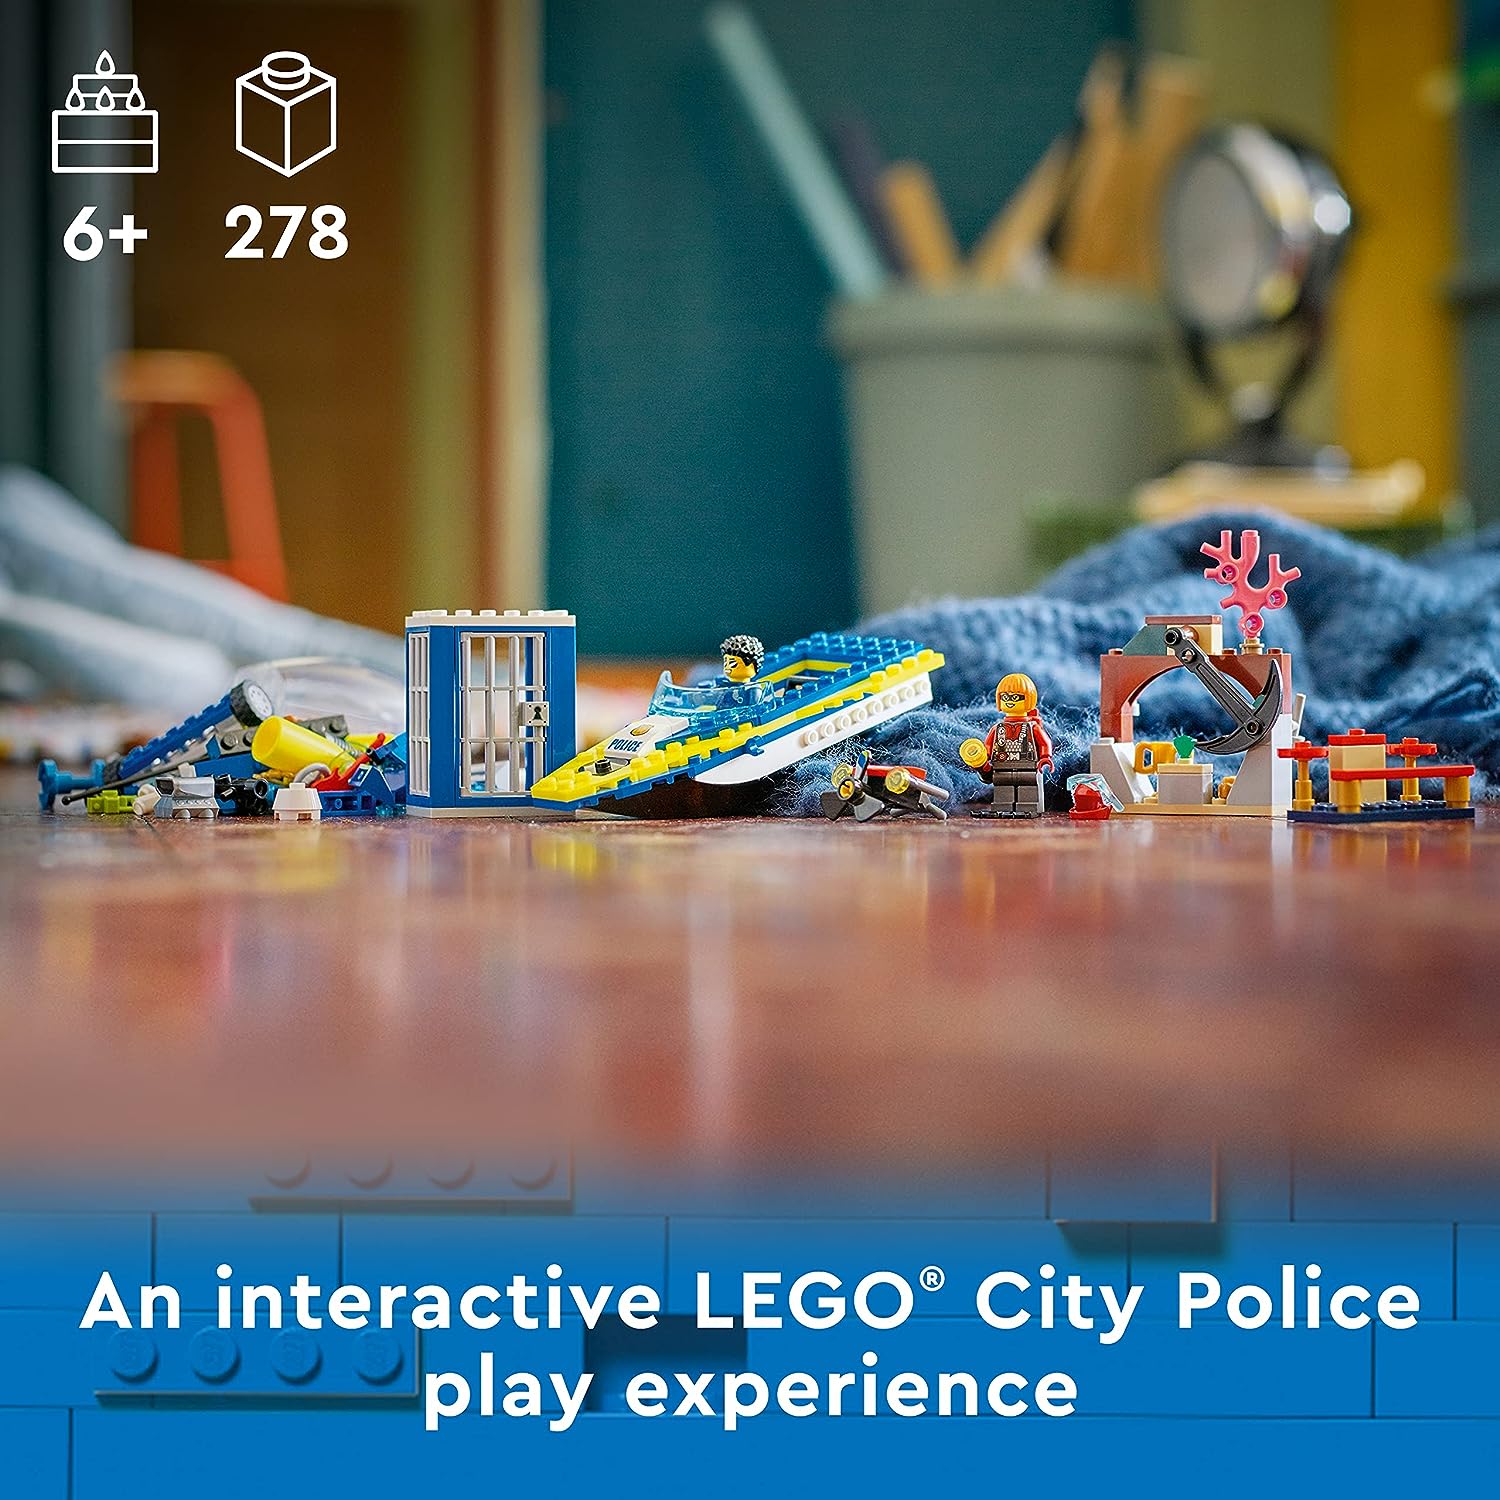 LEGO City Water Police Detective Missions 60355 Lego